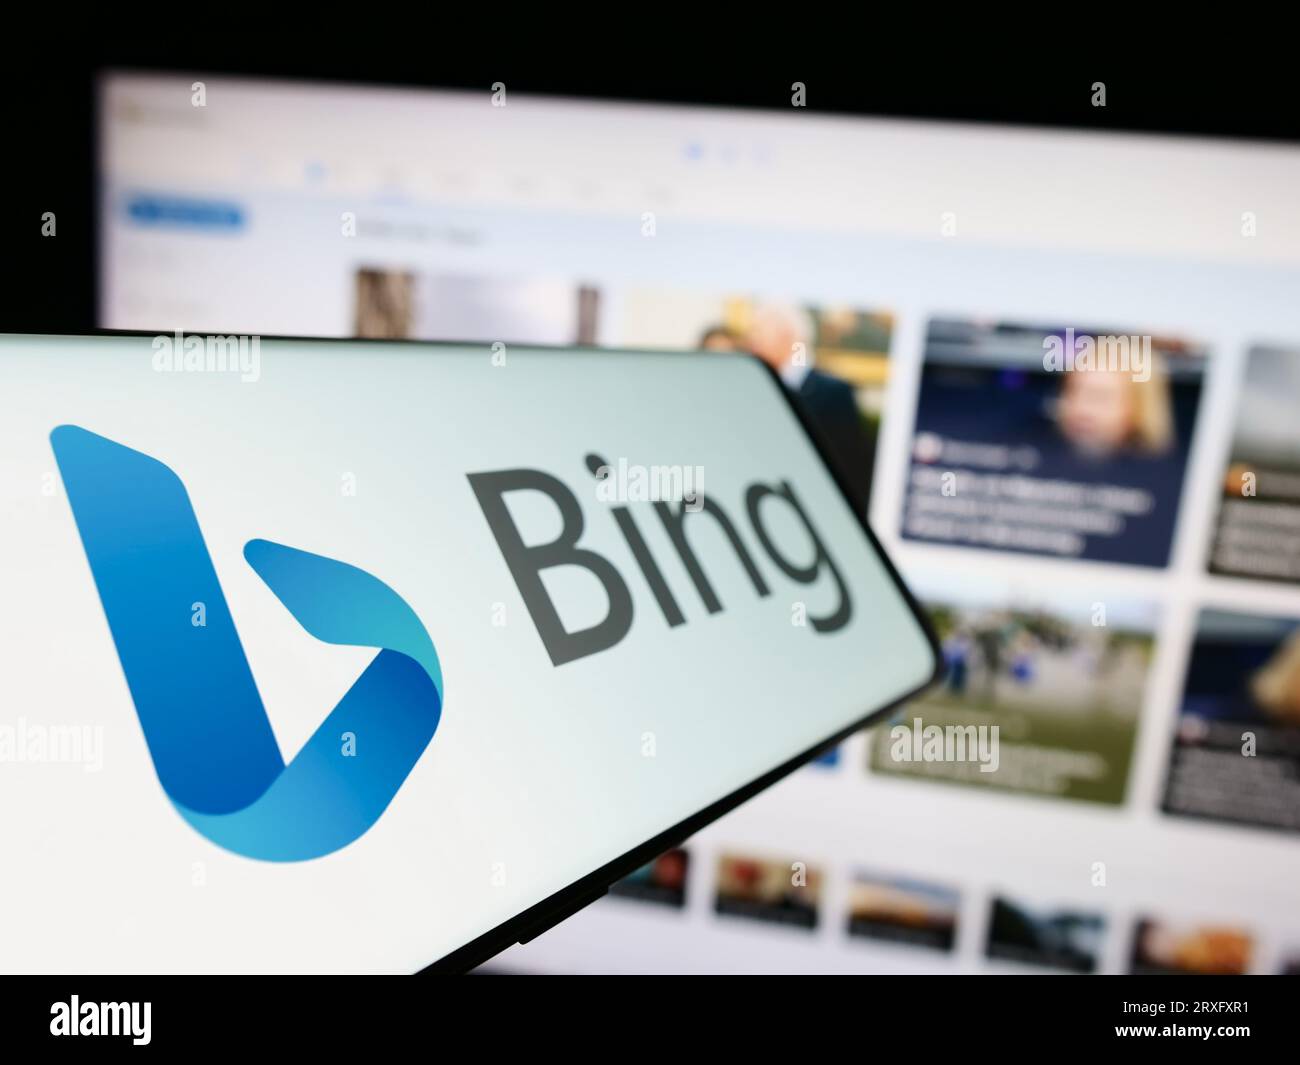 Mobile phone with logo of web search engine Microsoft Bing on screen in front of business website. Focus on center-left of phone display. Stock Photo